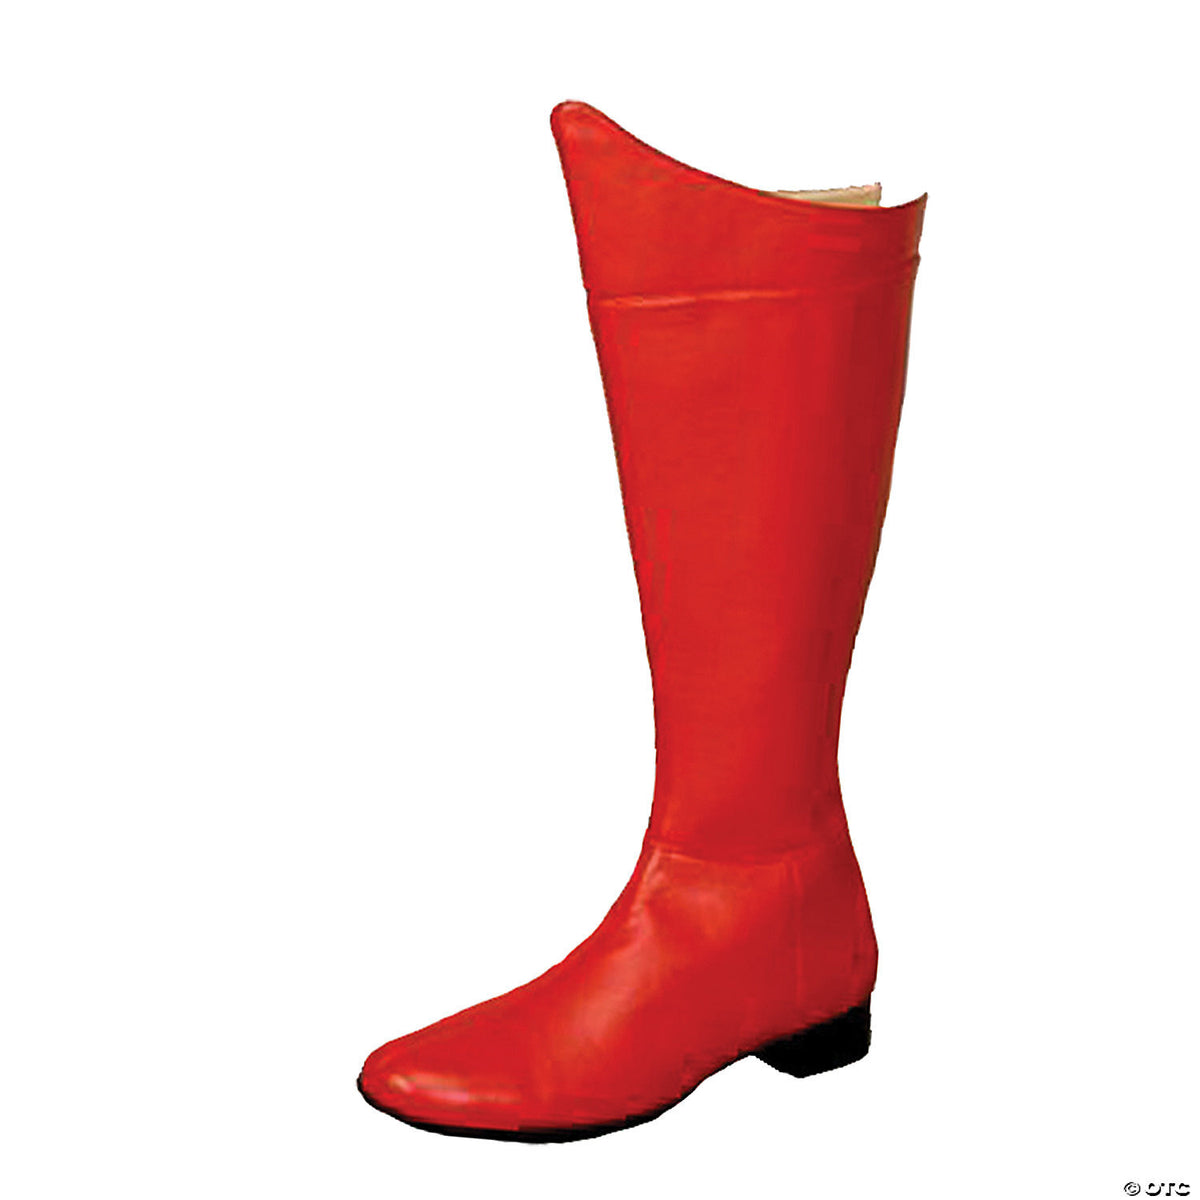 Superhero boots-red size 8/9